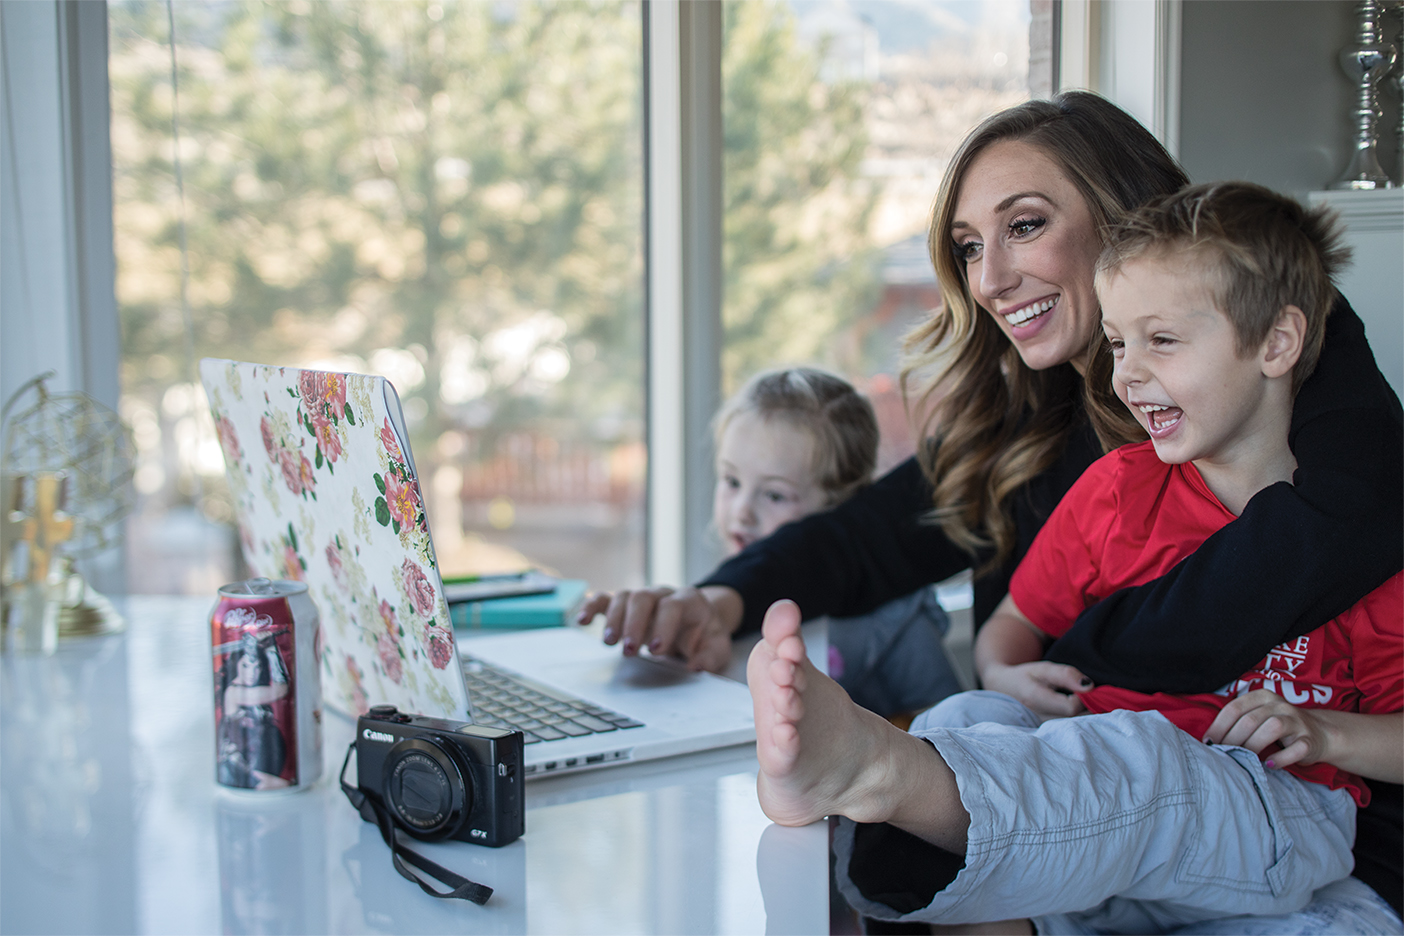 Jordan page sits at her table with one of her kids next to her and one on her lap as she looks at something on her laptop screen.